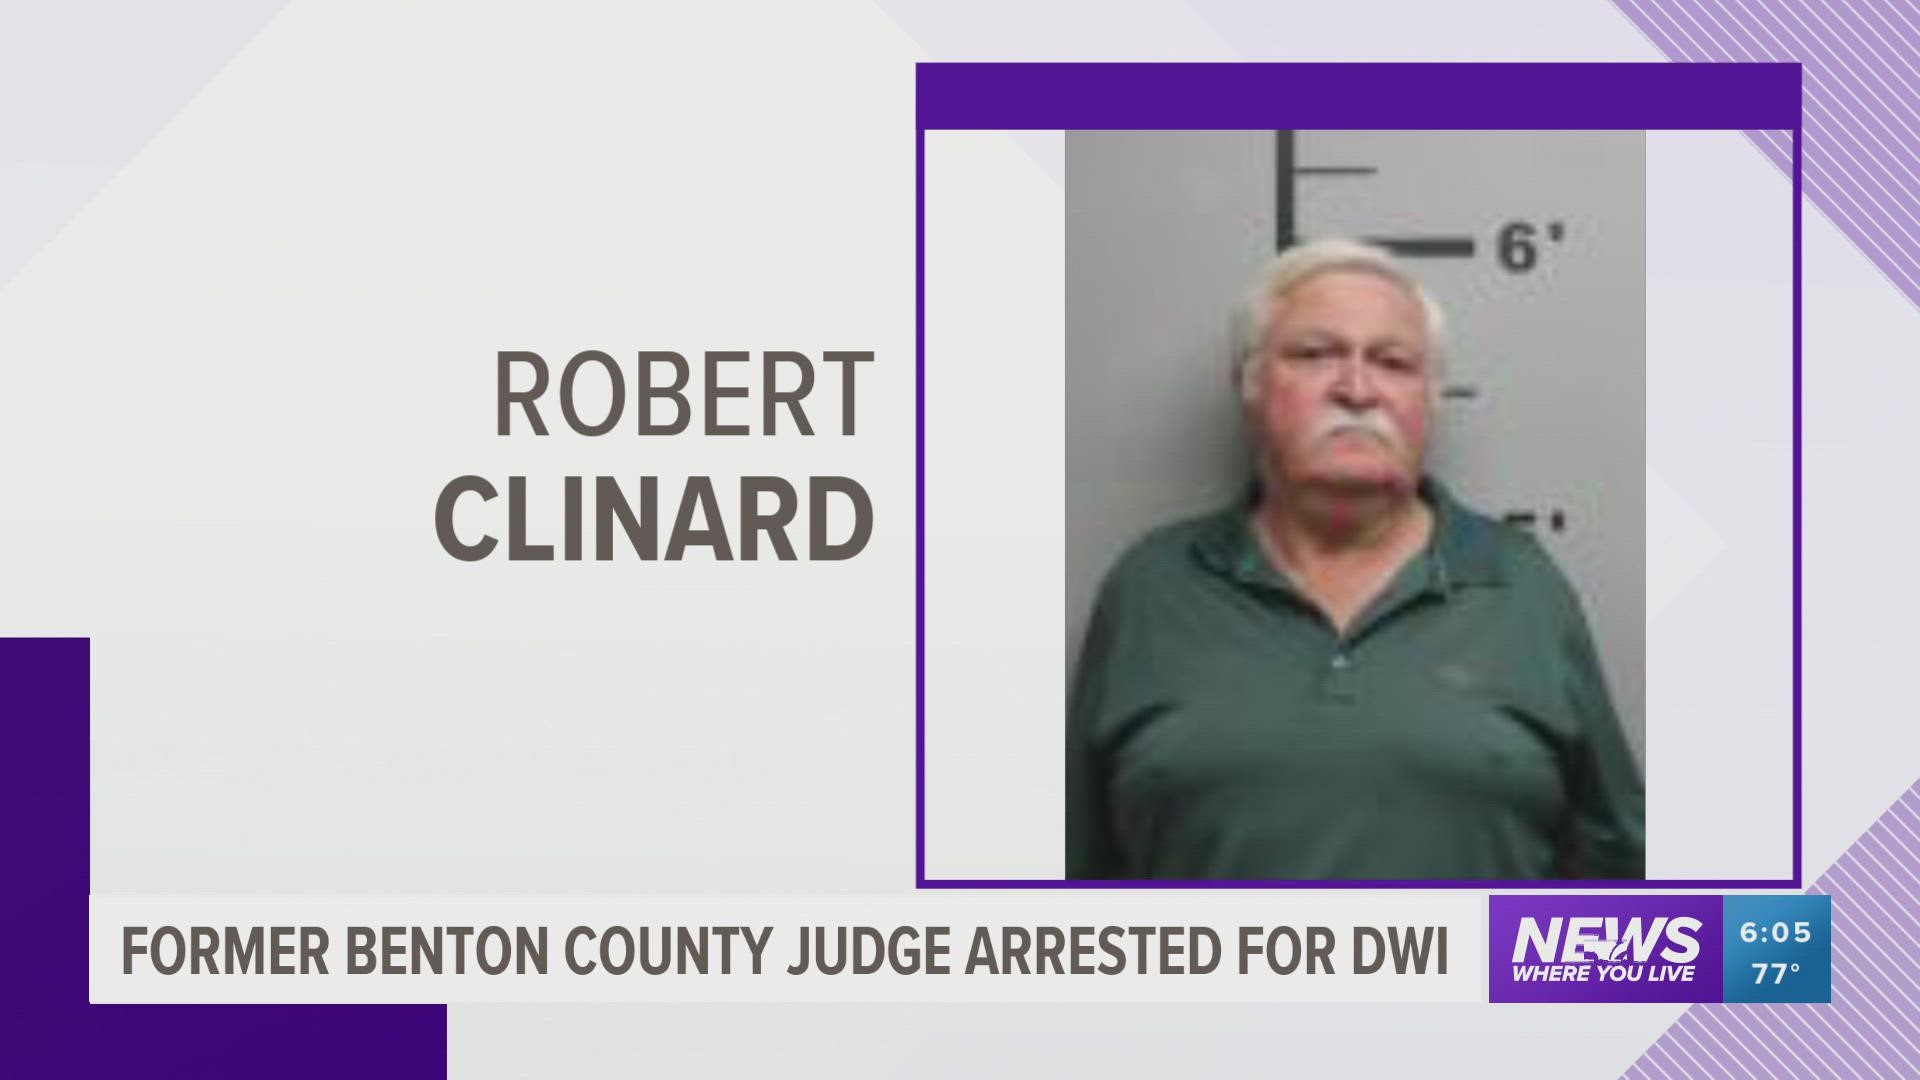 Former Benton County Judge Bob Clinard is facing a DWI charge following his arrest this week.